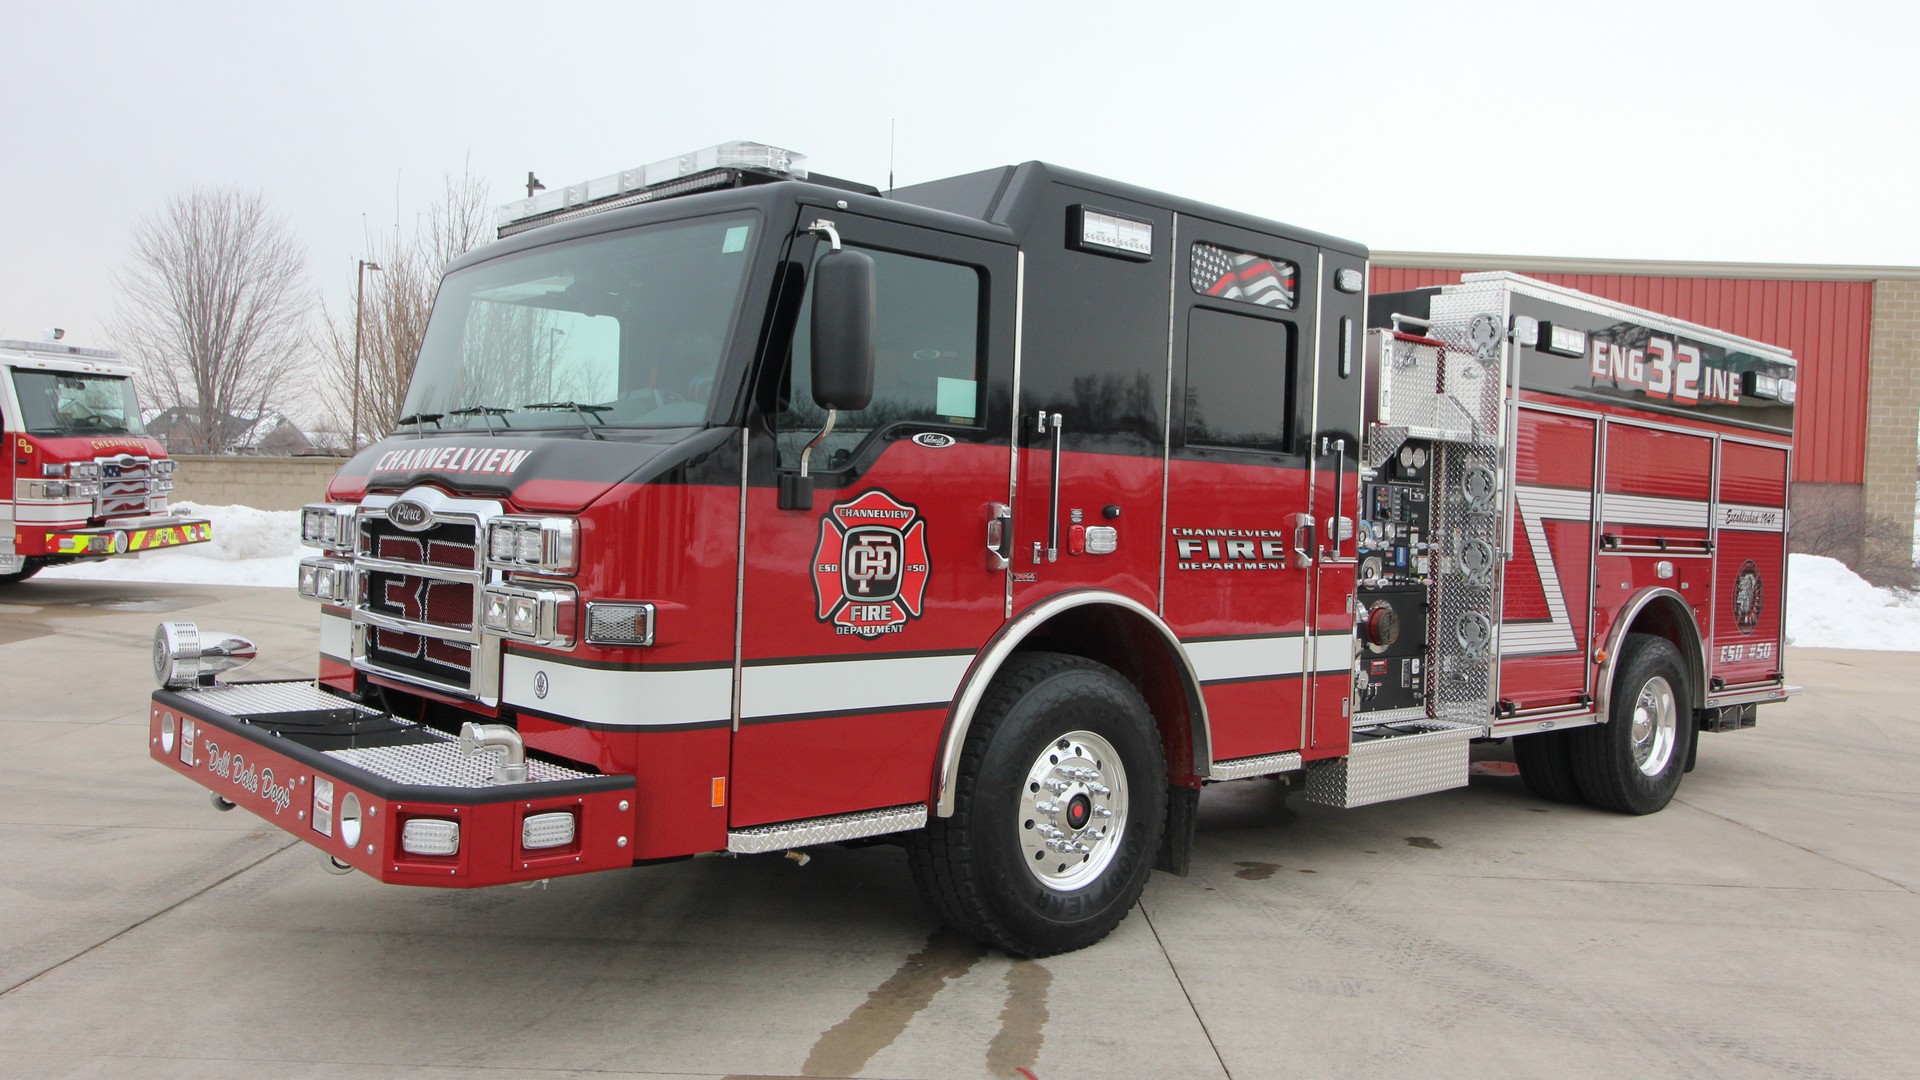 Channelview TX Velocity Pumper – 37345